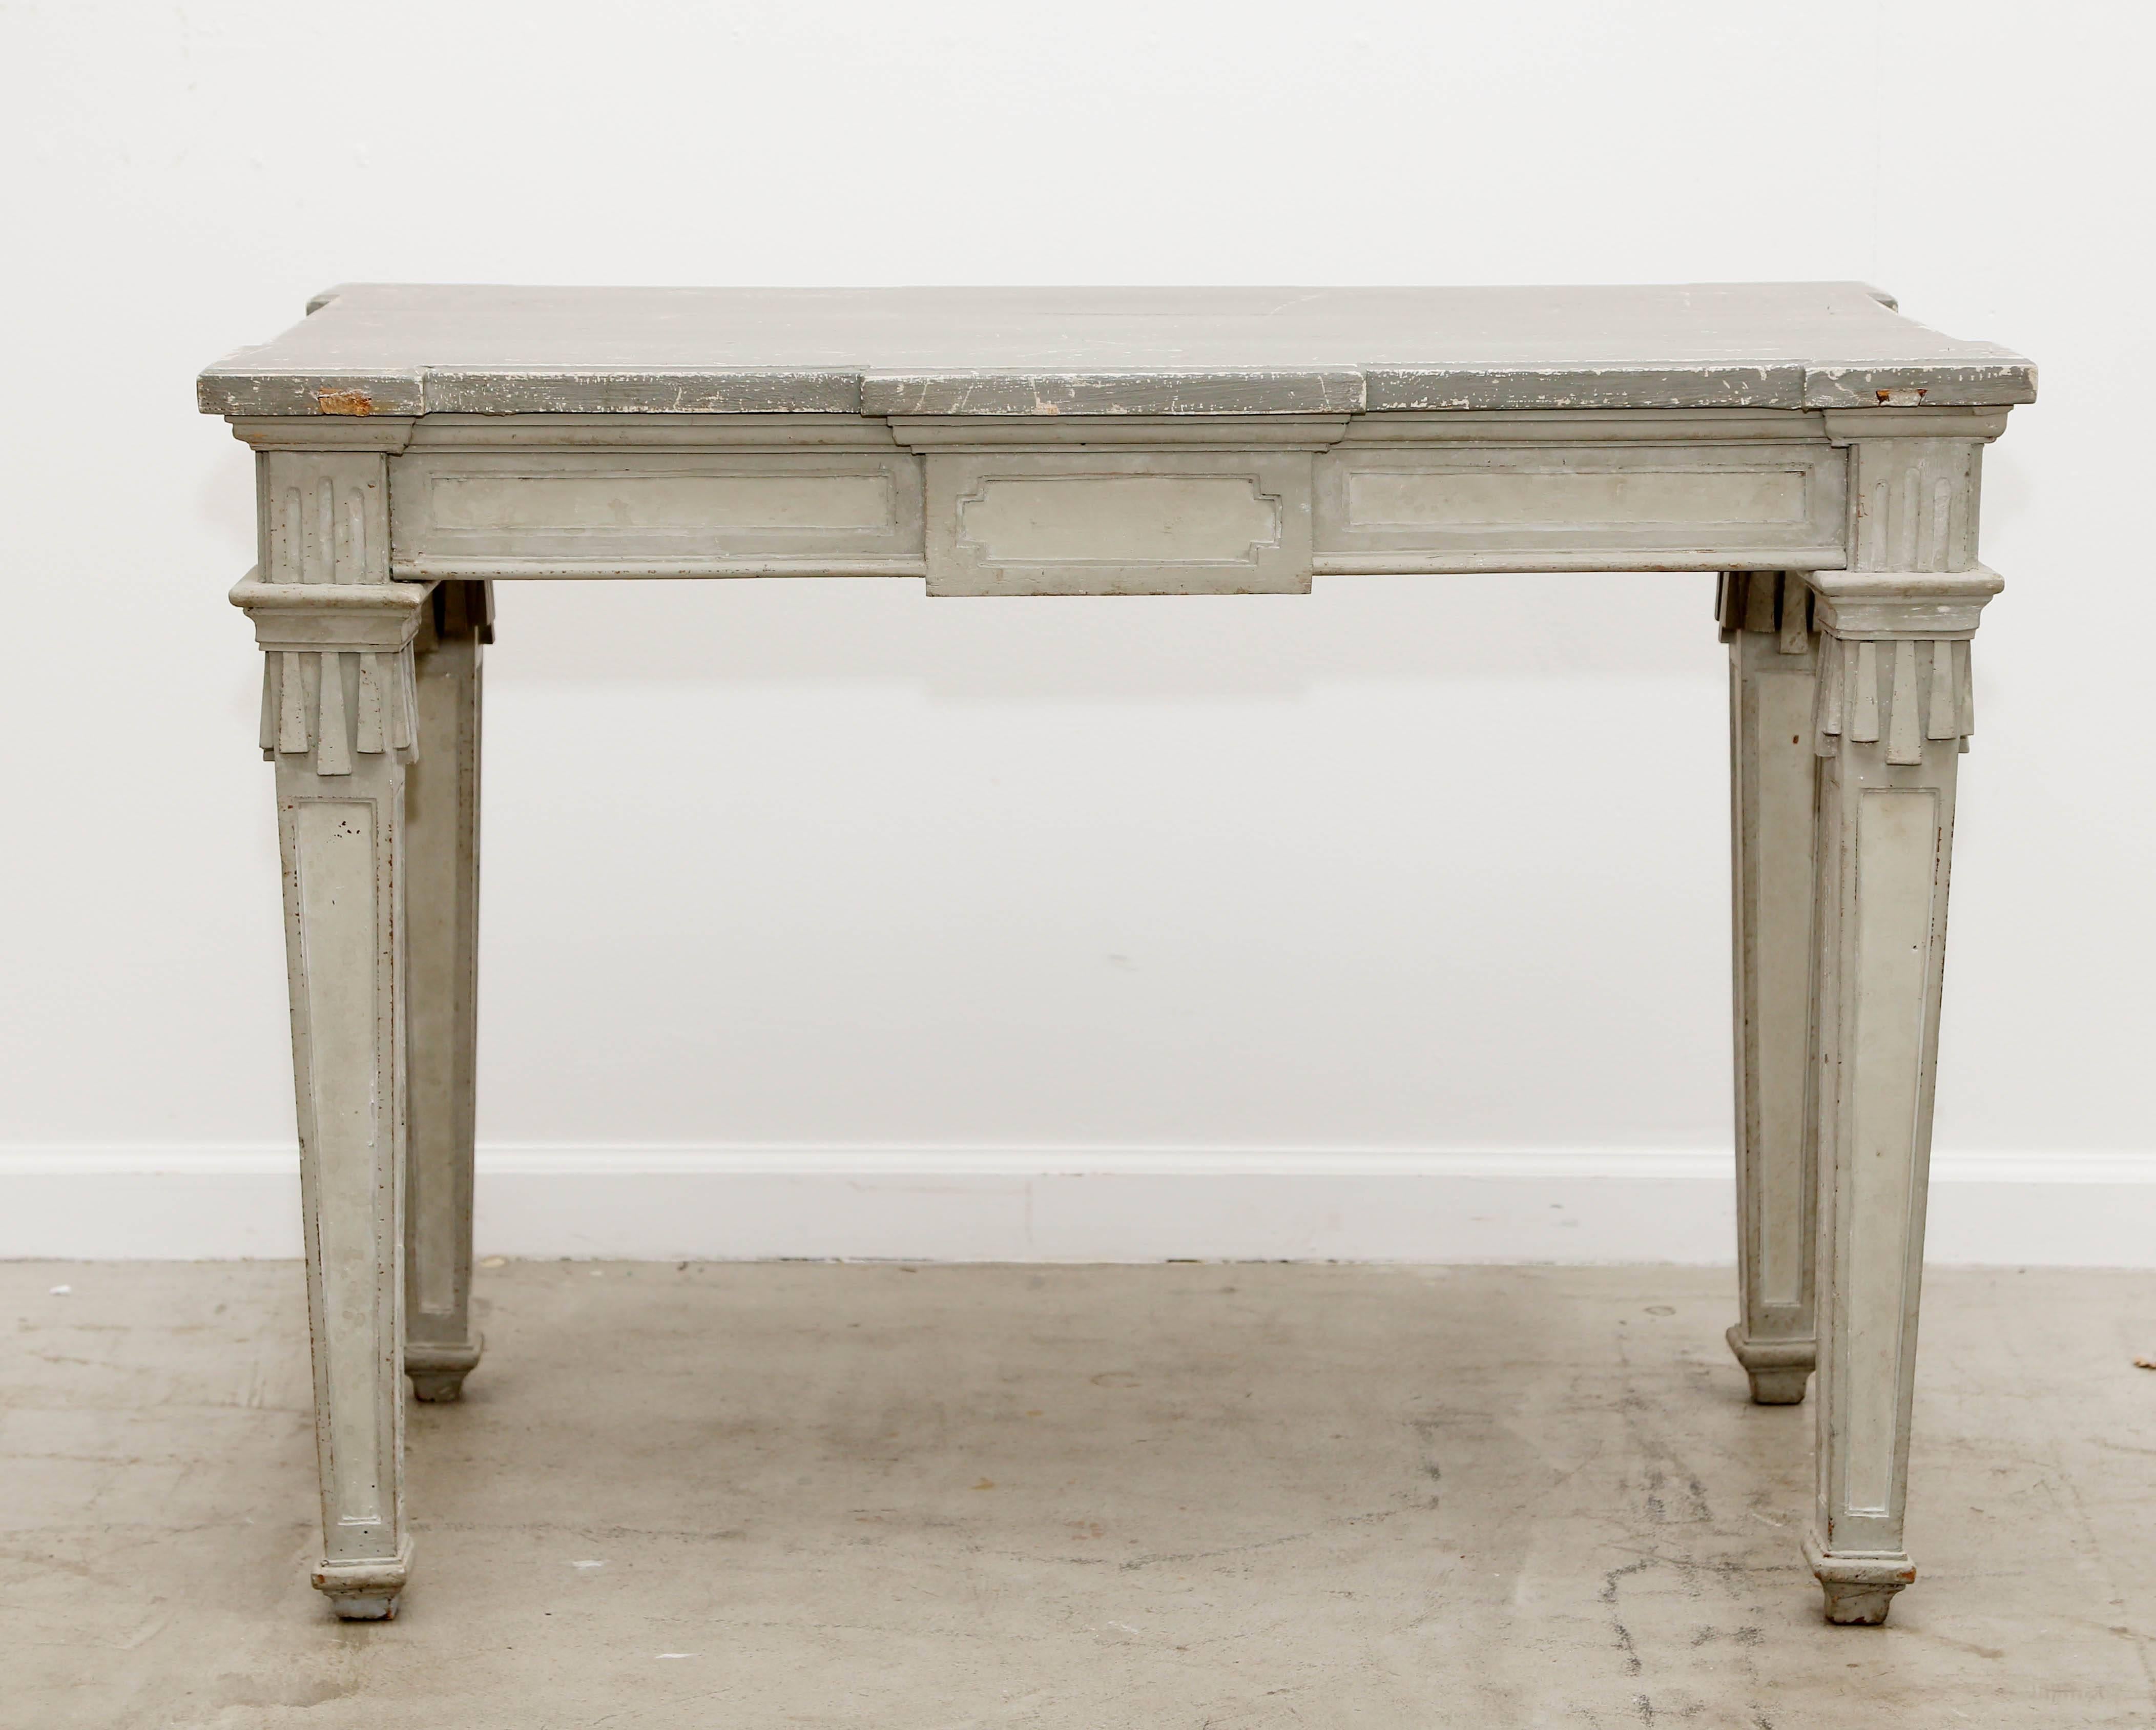 Antique Swedish period Gustavian painted console table early 19th century distressed painted on top in a darker grey with original scratches, cracks and marks and layers of original paint. Apron adorned with rectangular ornaments carving around